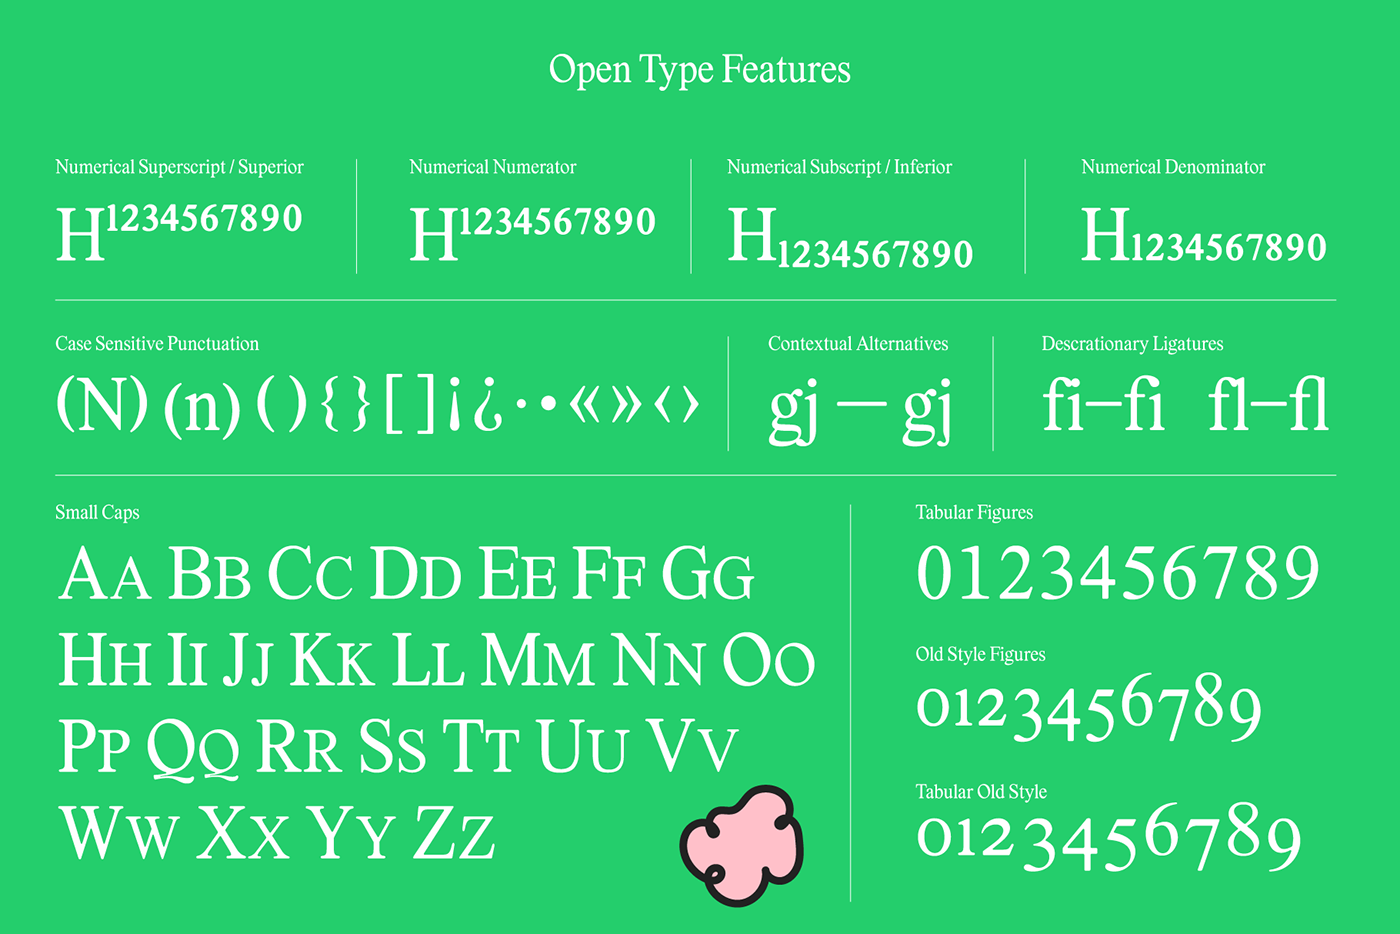 image showing open type features such as alternate numbers, case sensitive design, small caps